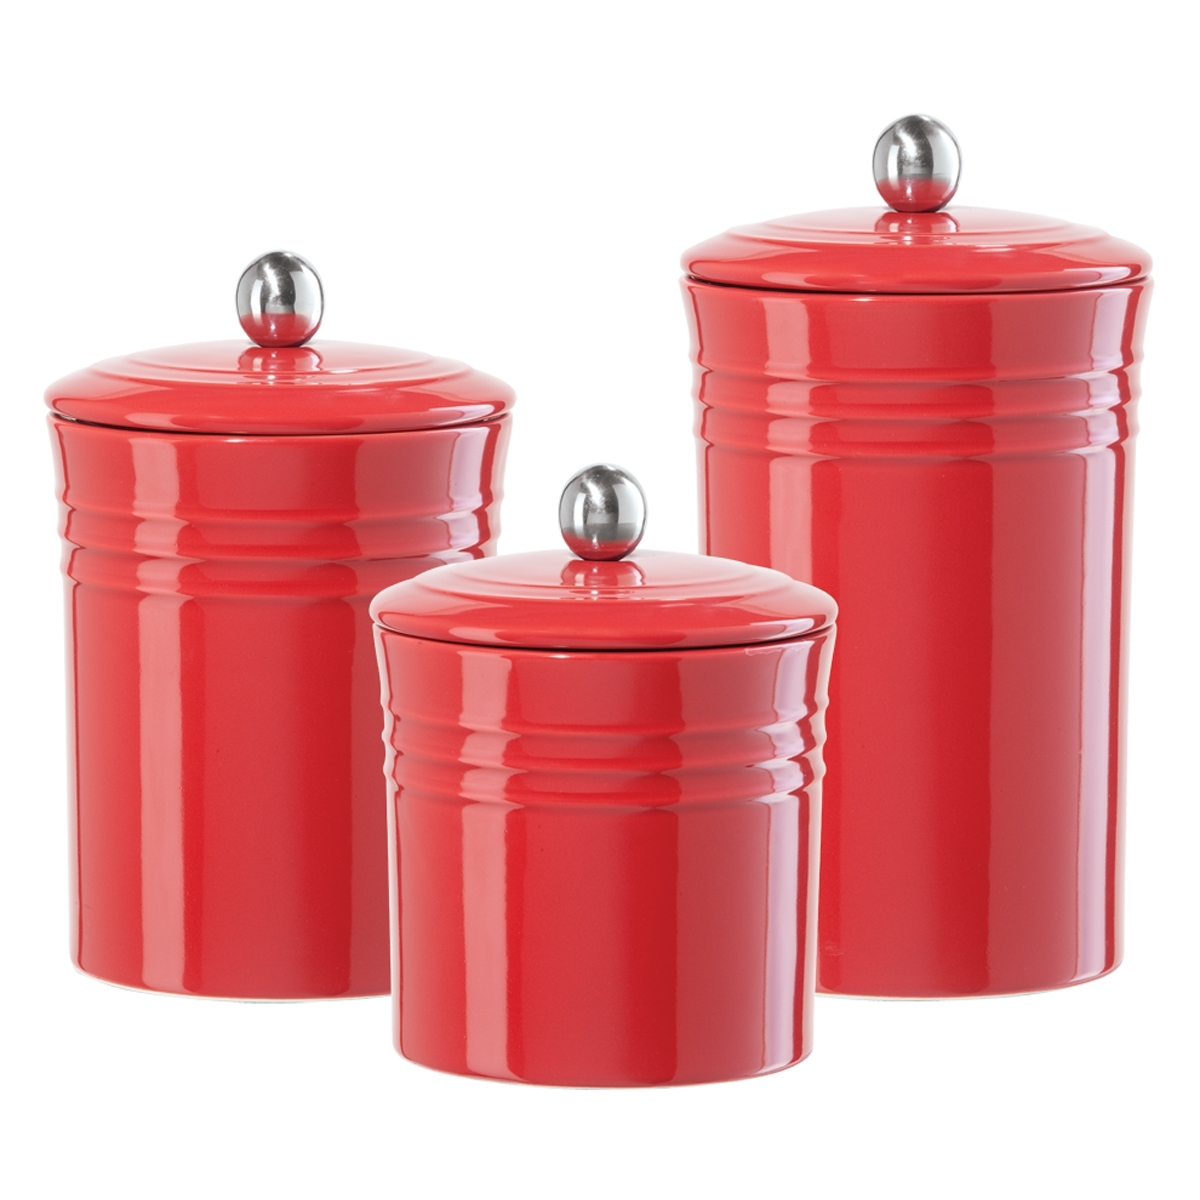 The Ribbed Ceramic Canister Collection Is A Available In Three Sizes 